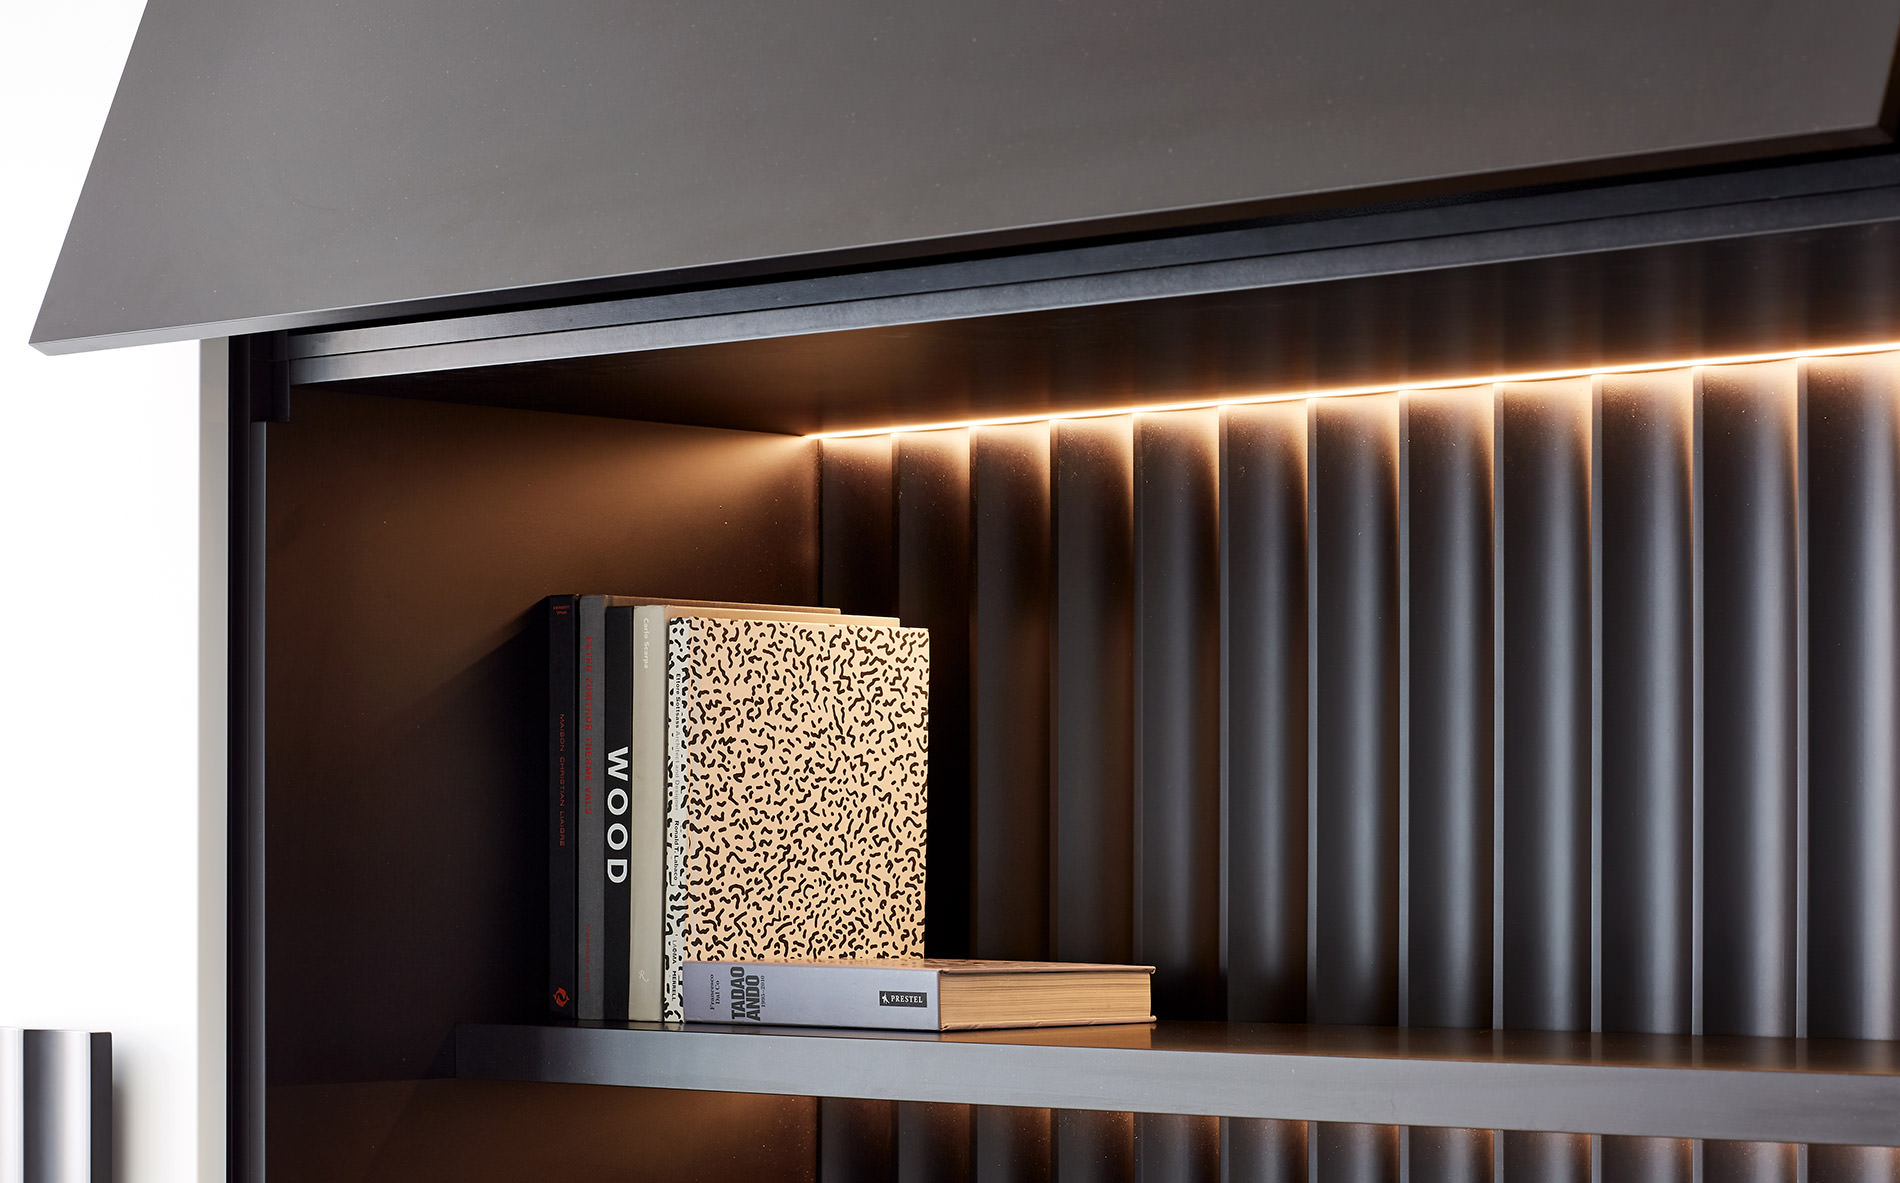 Purposefully perched on a stunning back lit shelf designed by Australian furniture designer FrancoCrea are two isolated books calling to be read